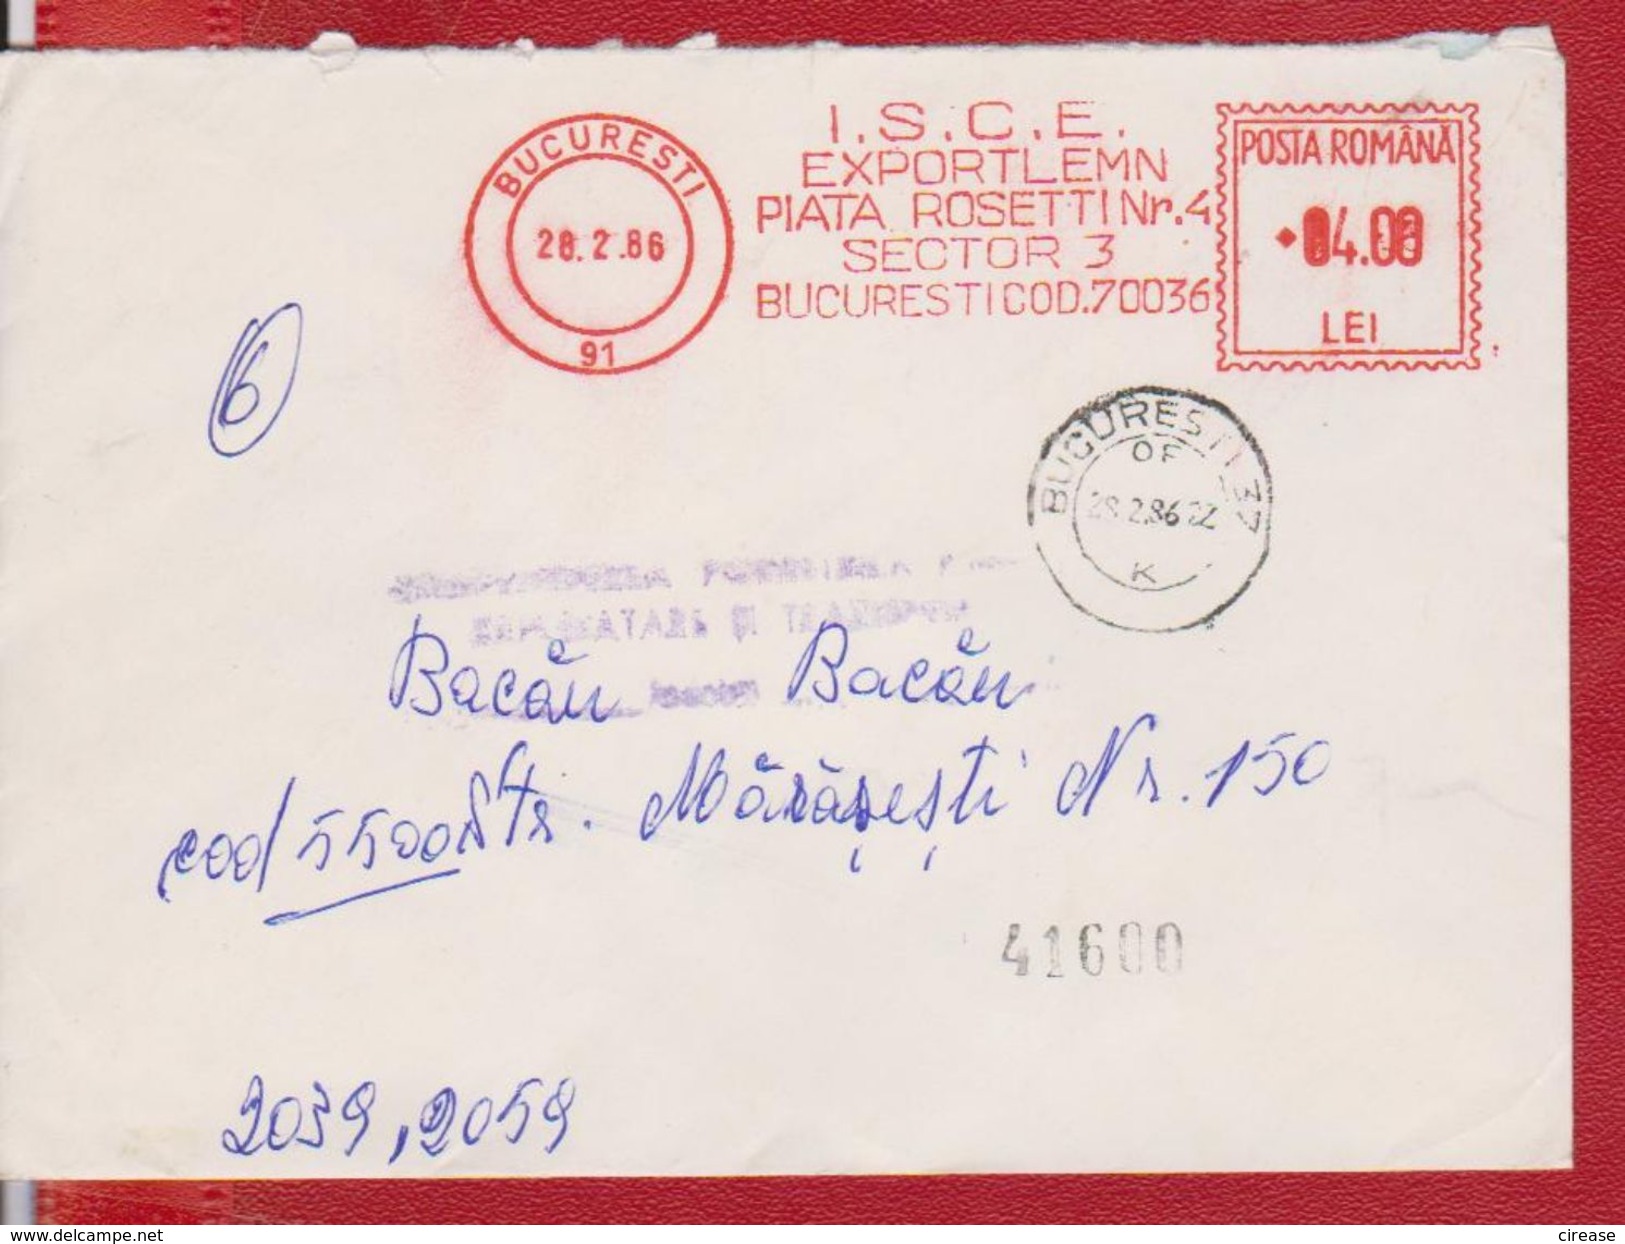 POSTAL HISTORY COVER, WITH MACHINE RED STAMP EXPORT WOOD FOREST TREE ROMANIA COVER - Automaatzegels [ATM]